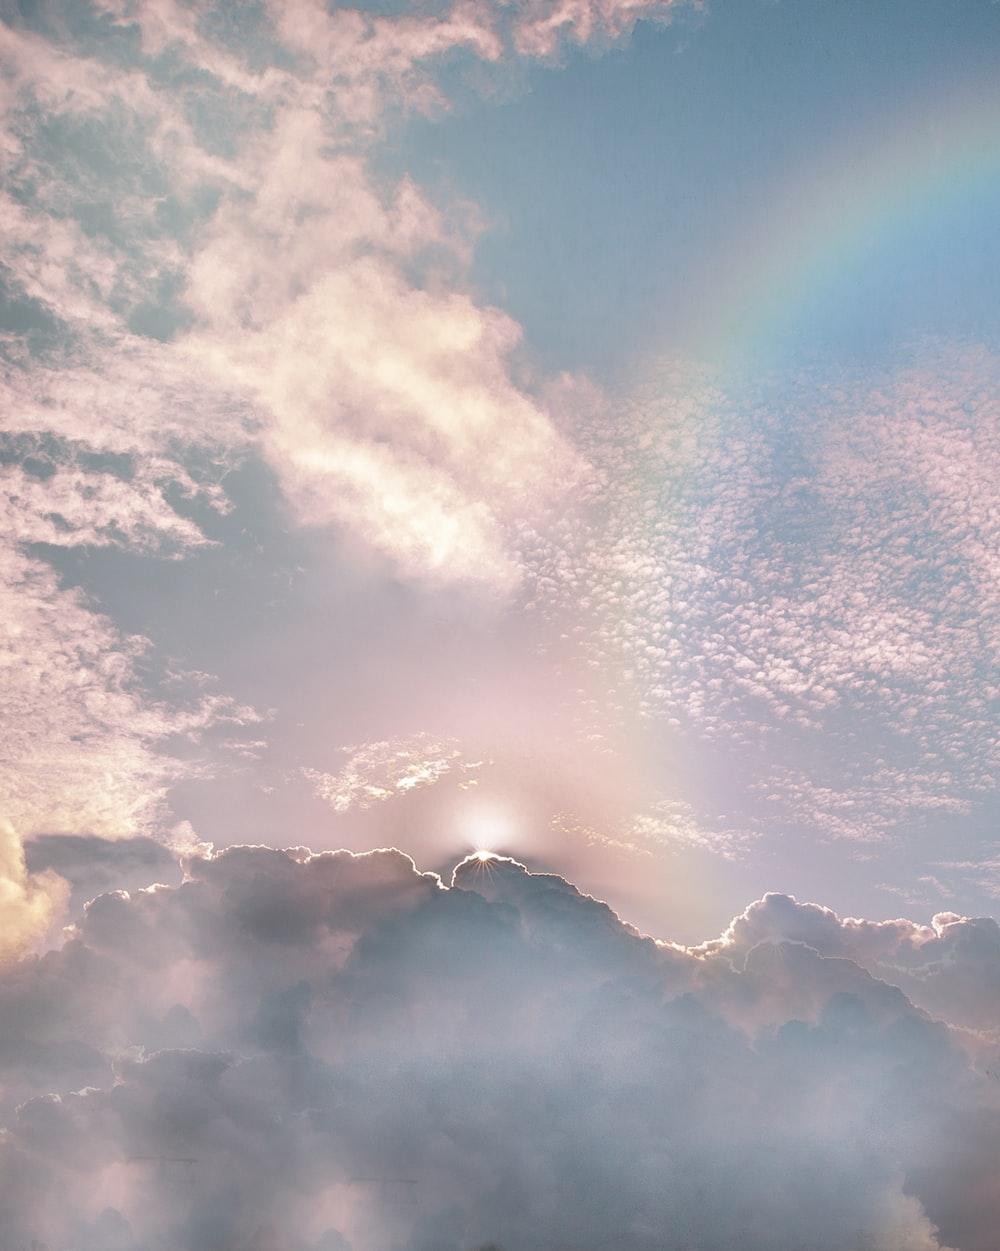 Rainbow Picture [HD]. Download Free Image